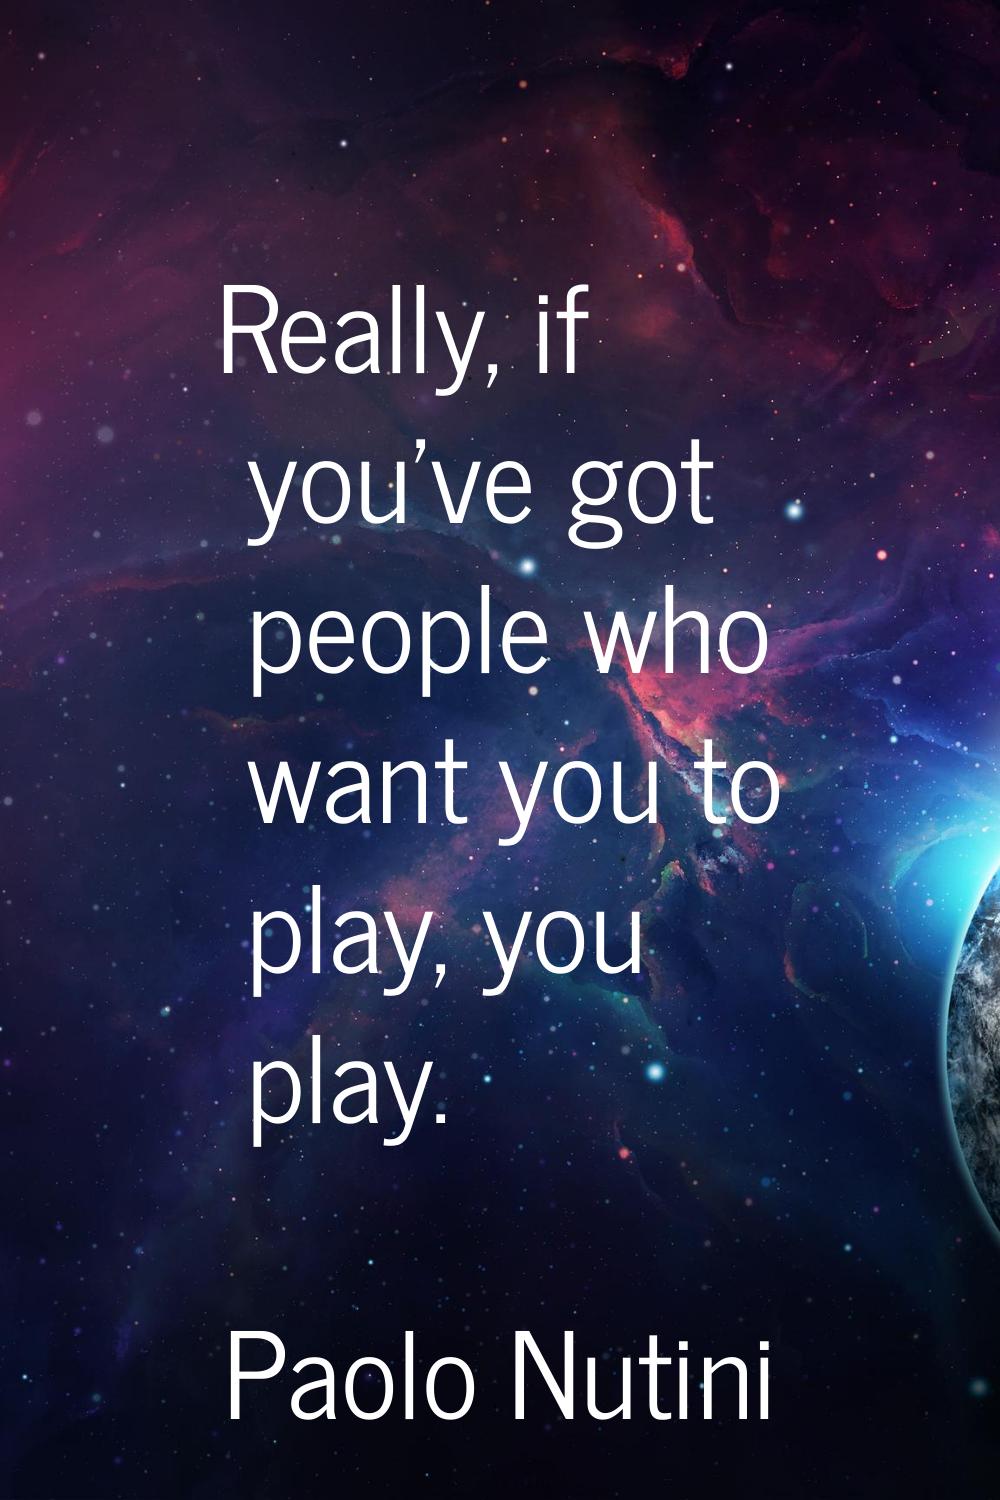 Really, if you've got people who want you to play, you play.